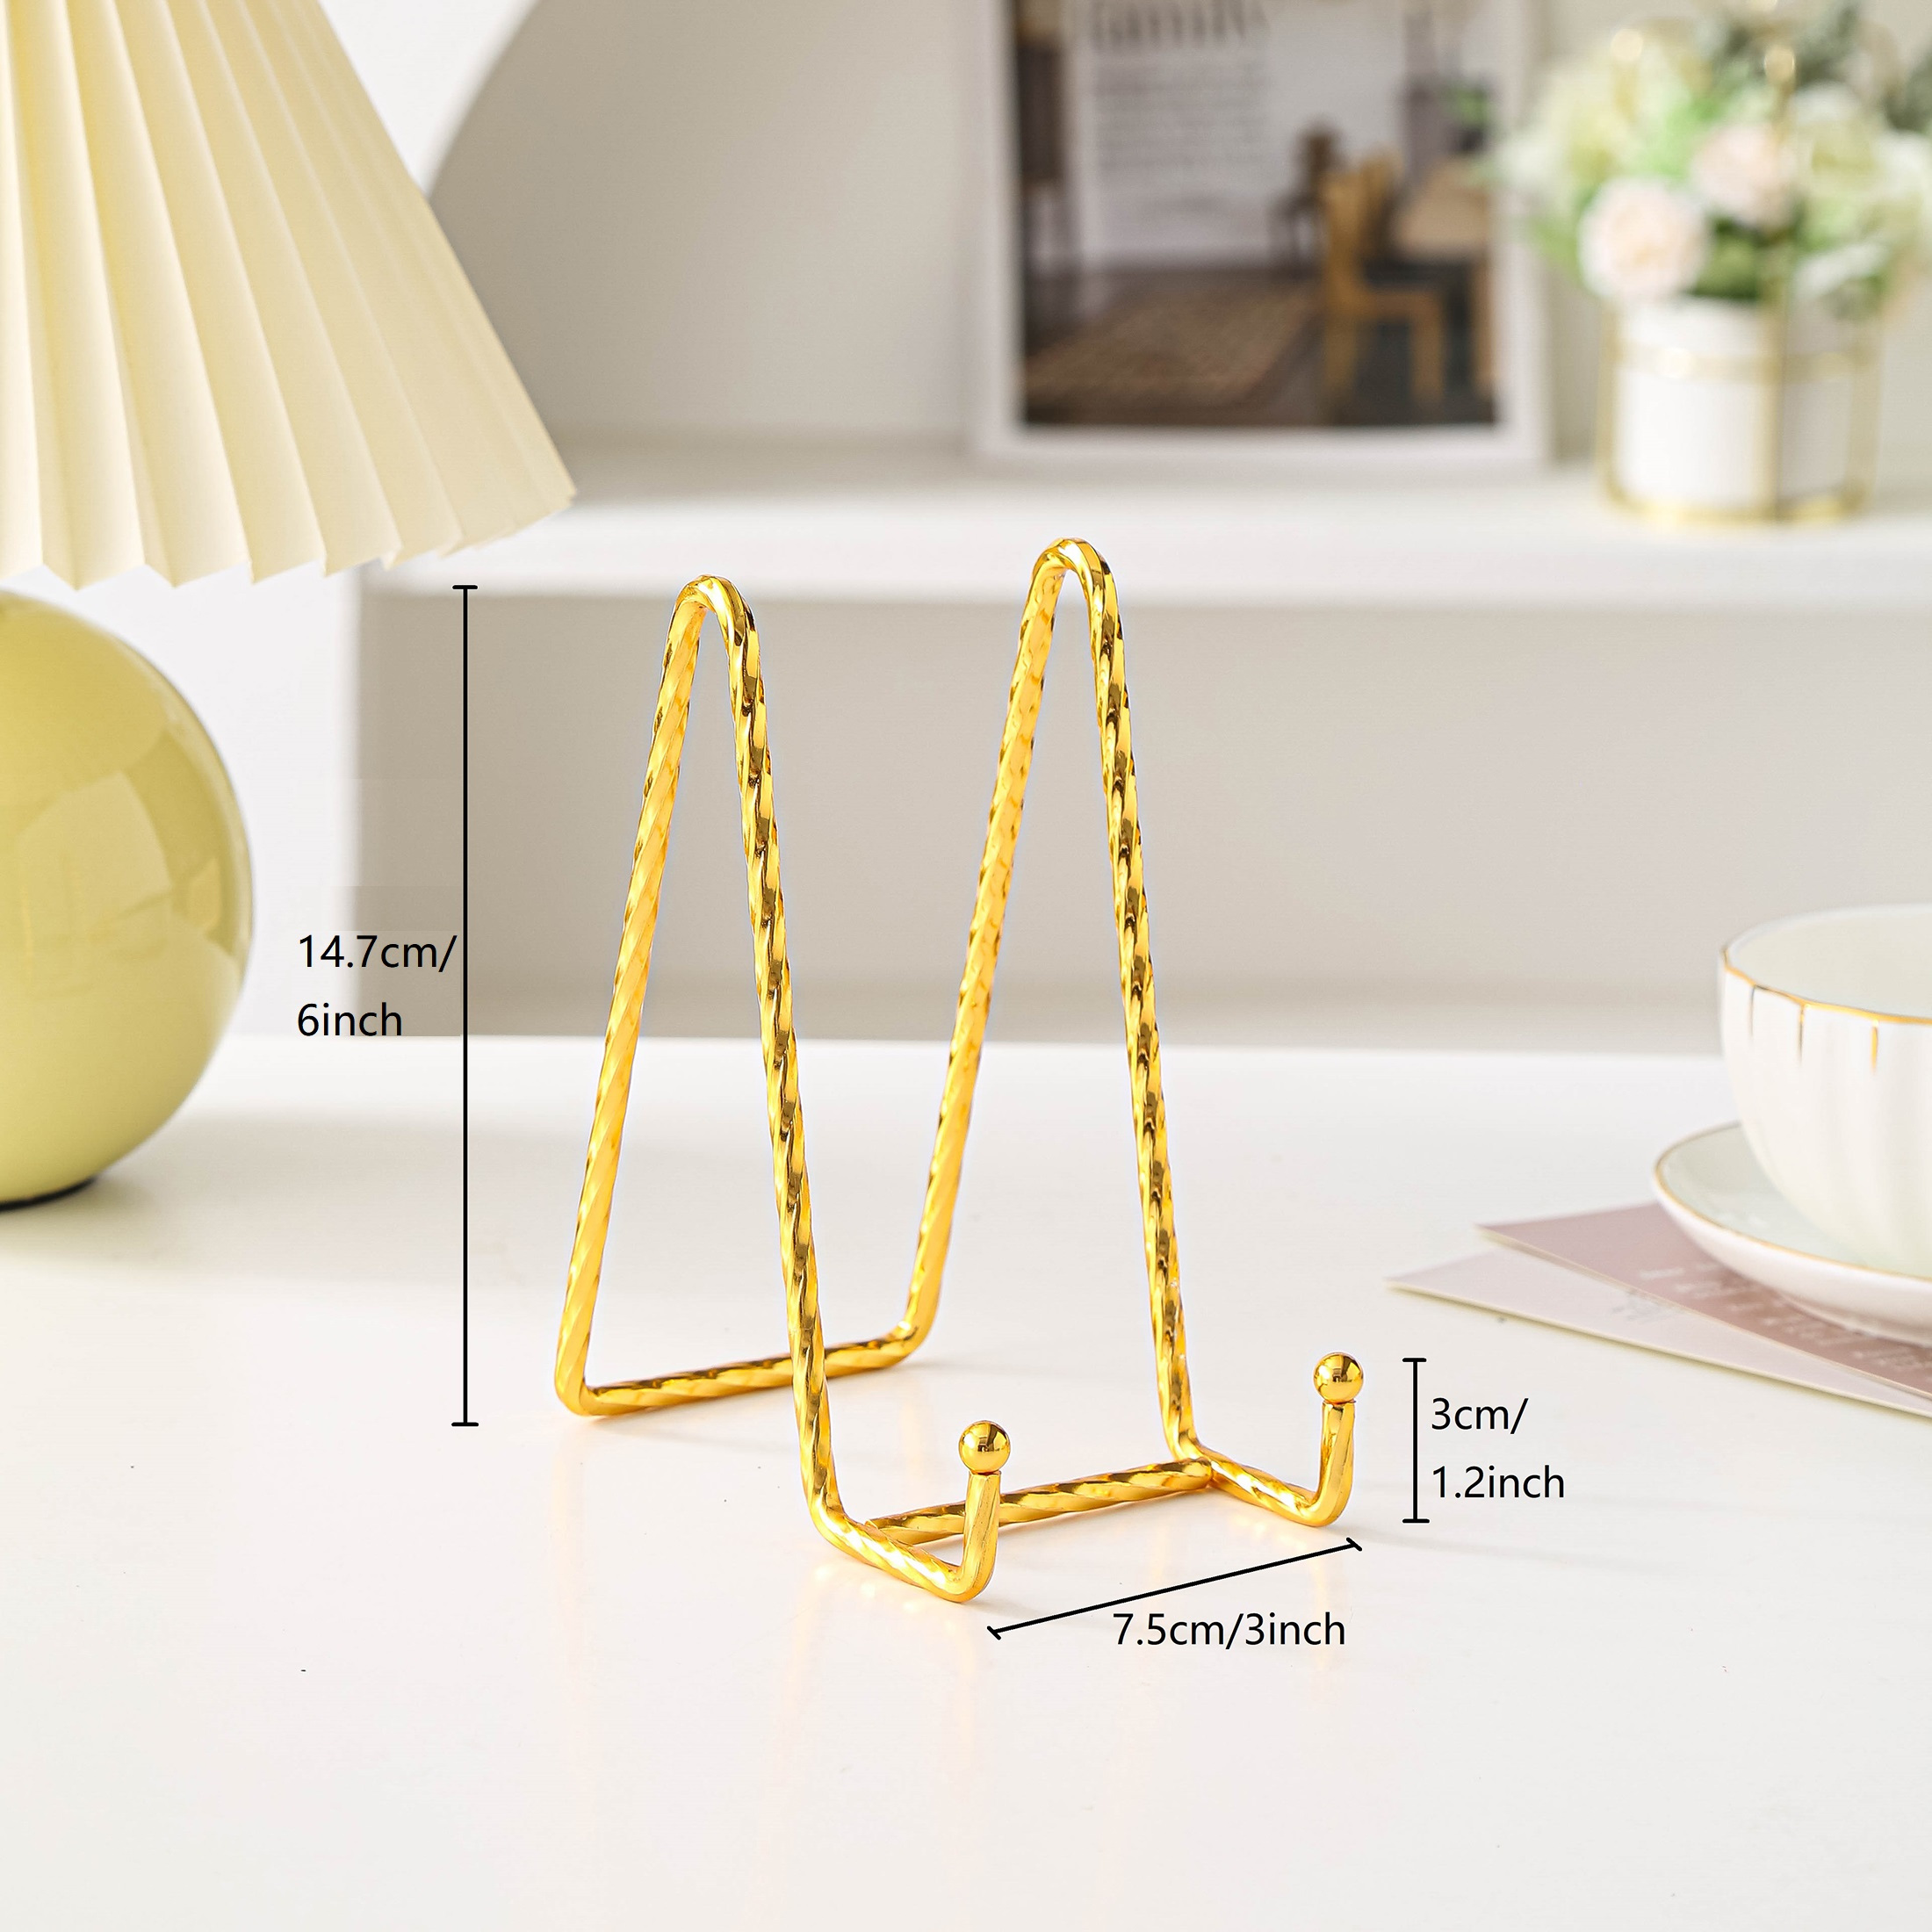 Plate Stands for Display - older Stand + Metal Frame holder stand Picture,  Decorative Plate, Book, Photo Easel,GoldSmall